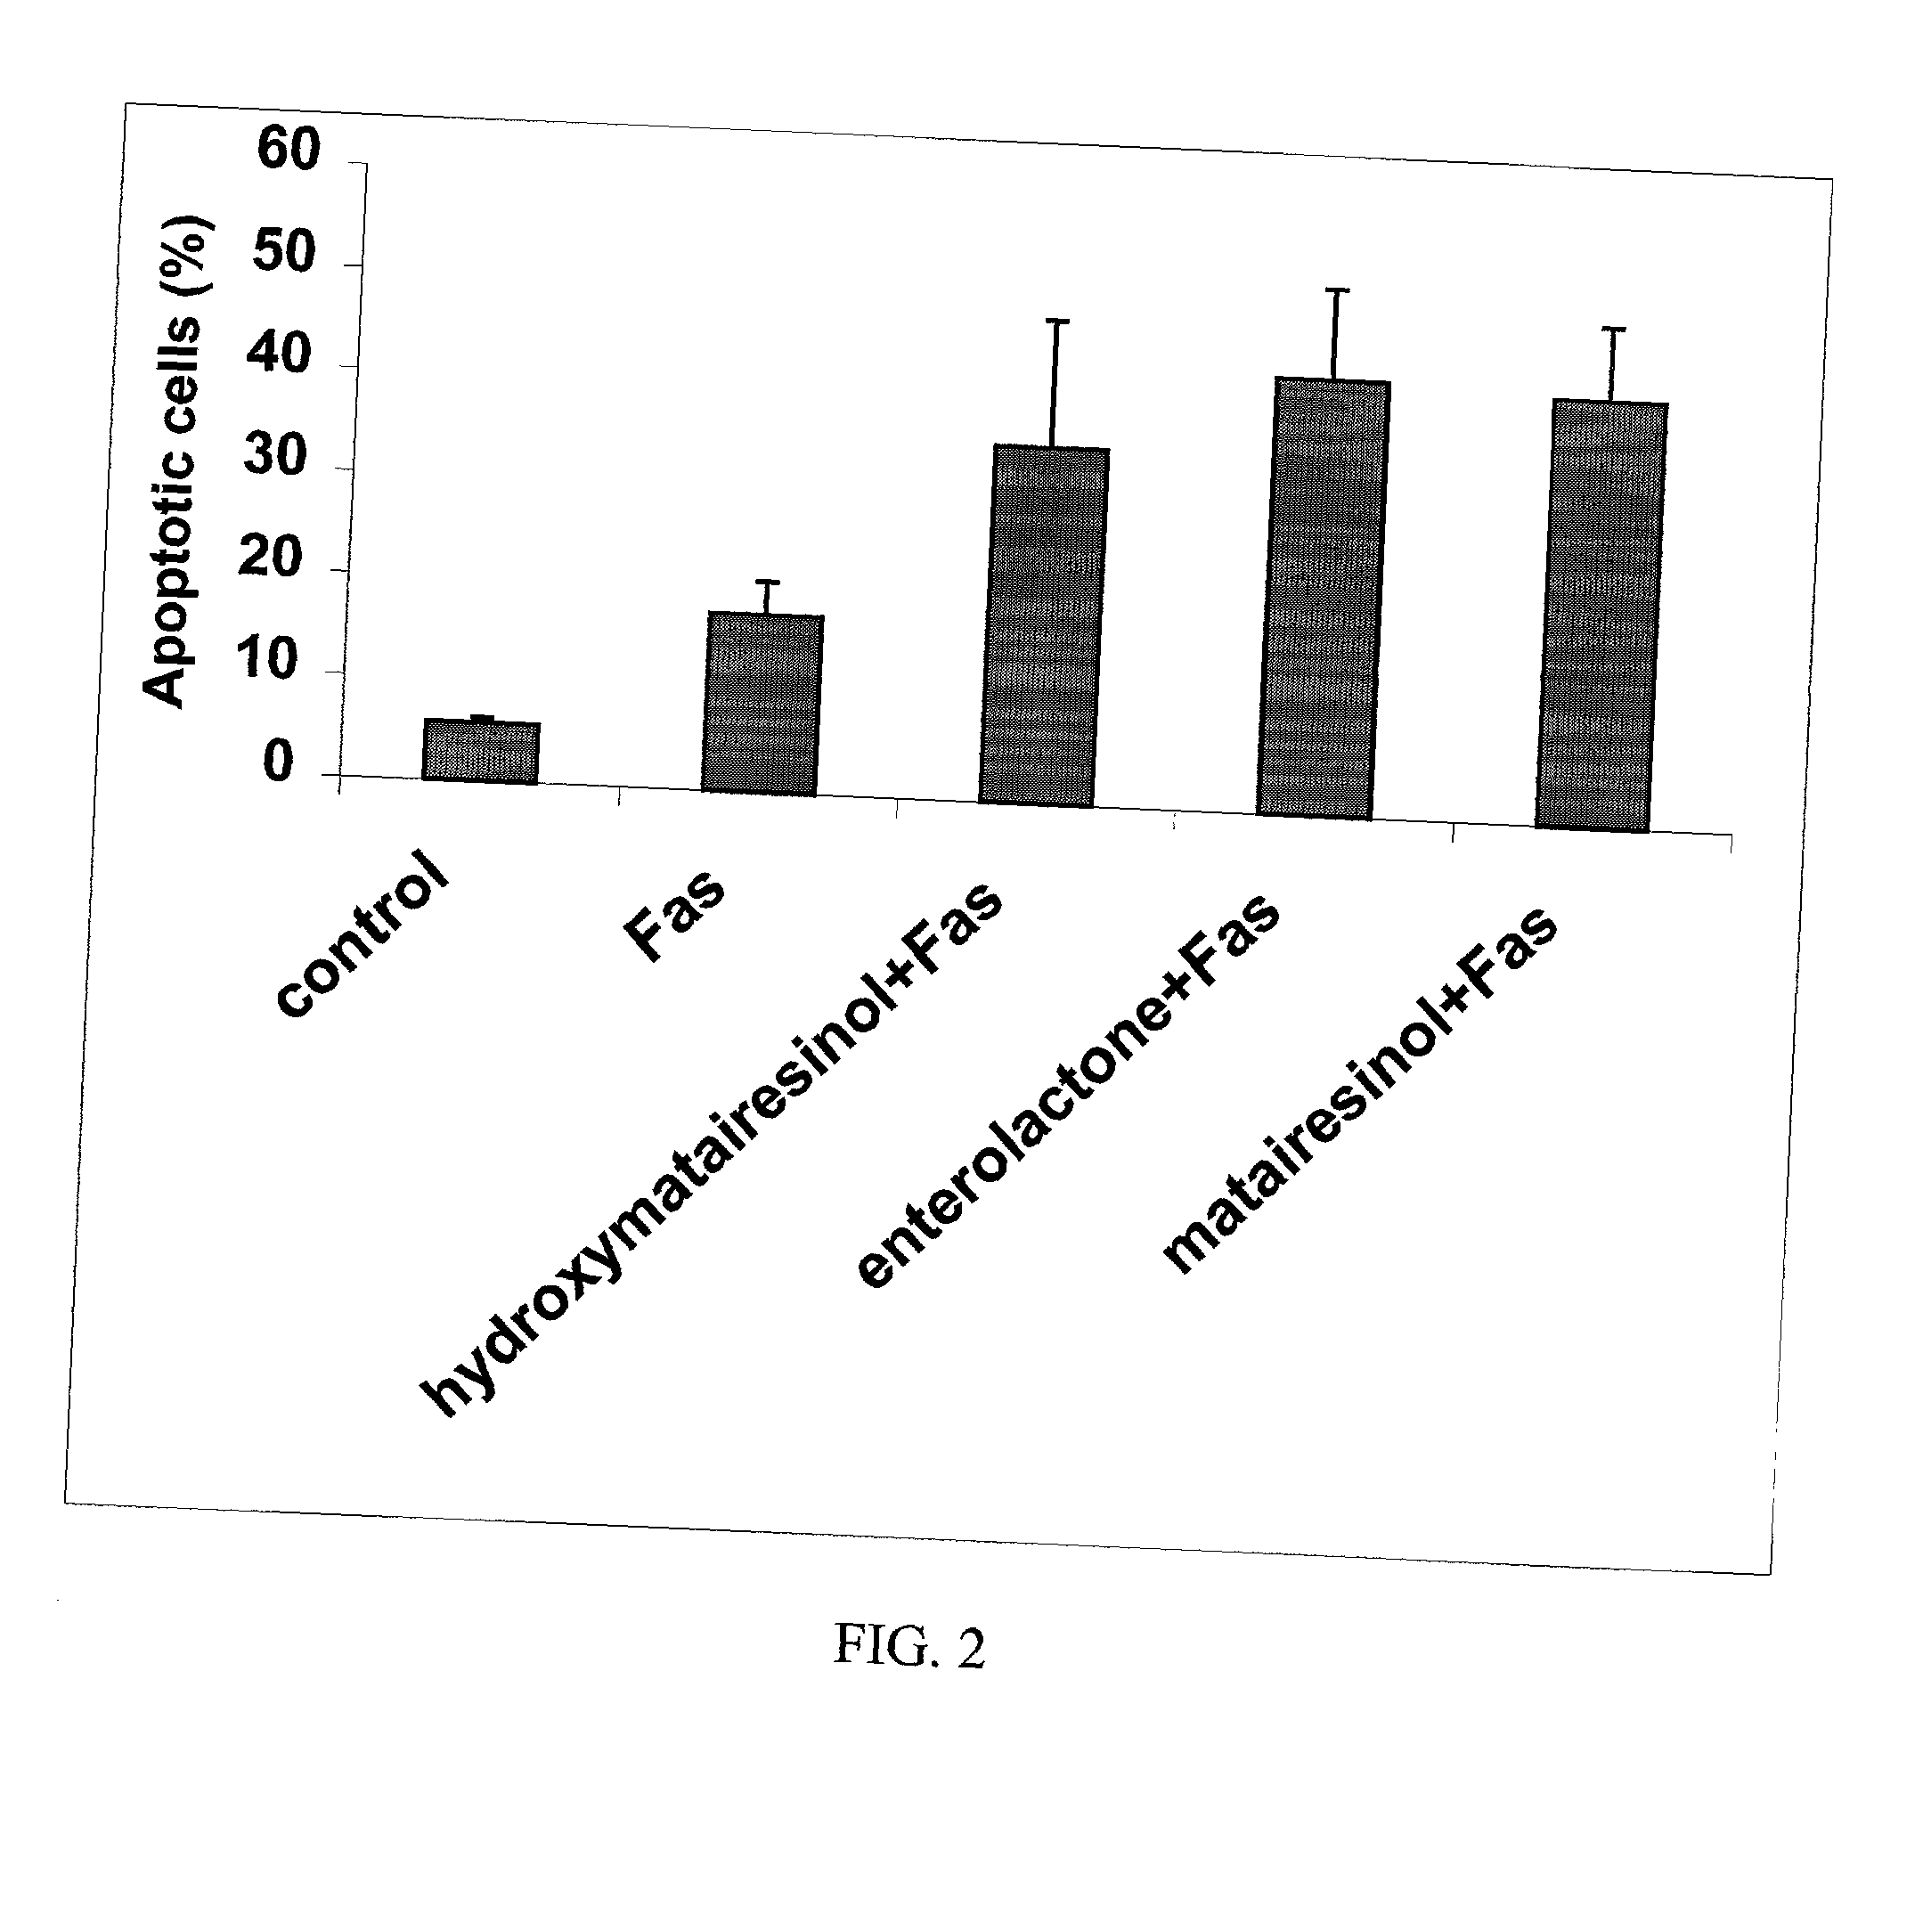 Method of inhibiting overactivity of phagocytes or lymphocytes in an individual